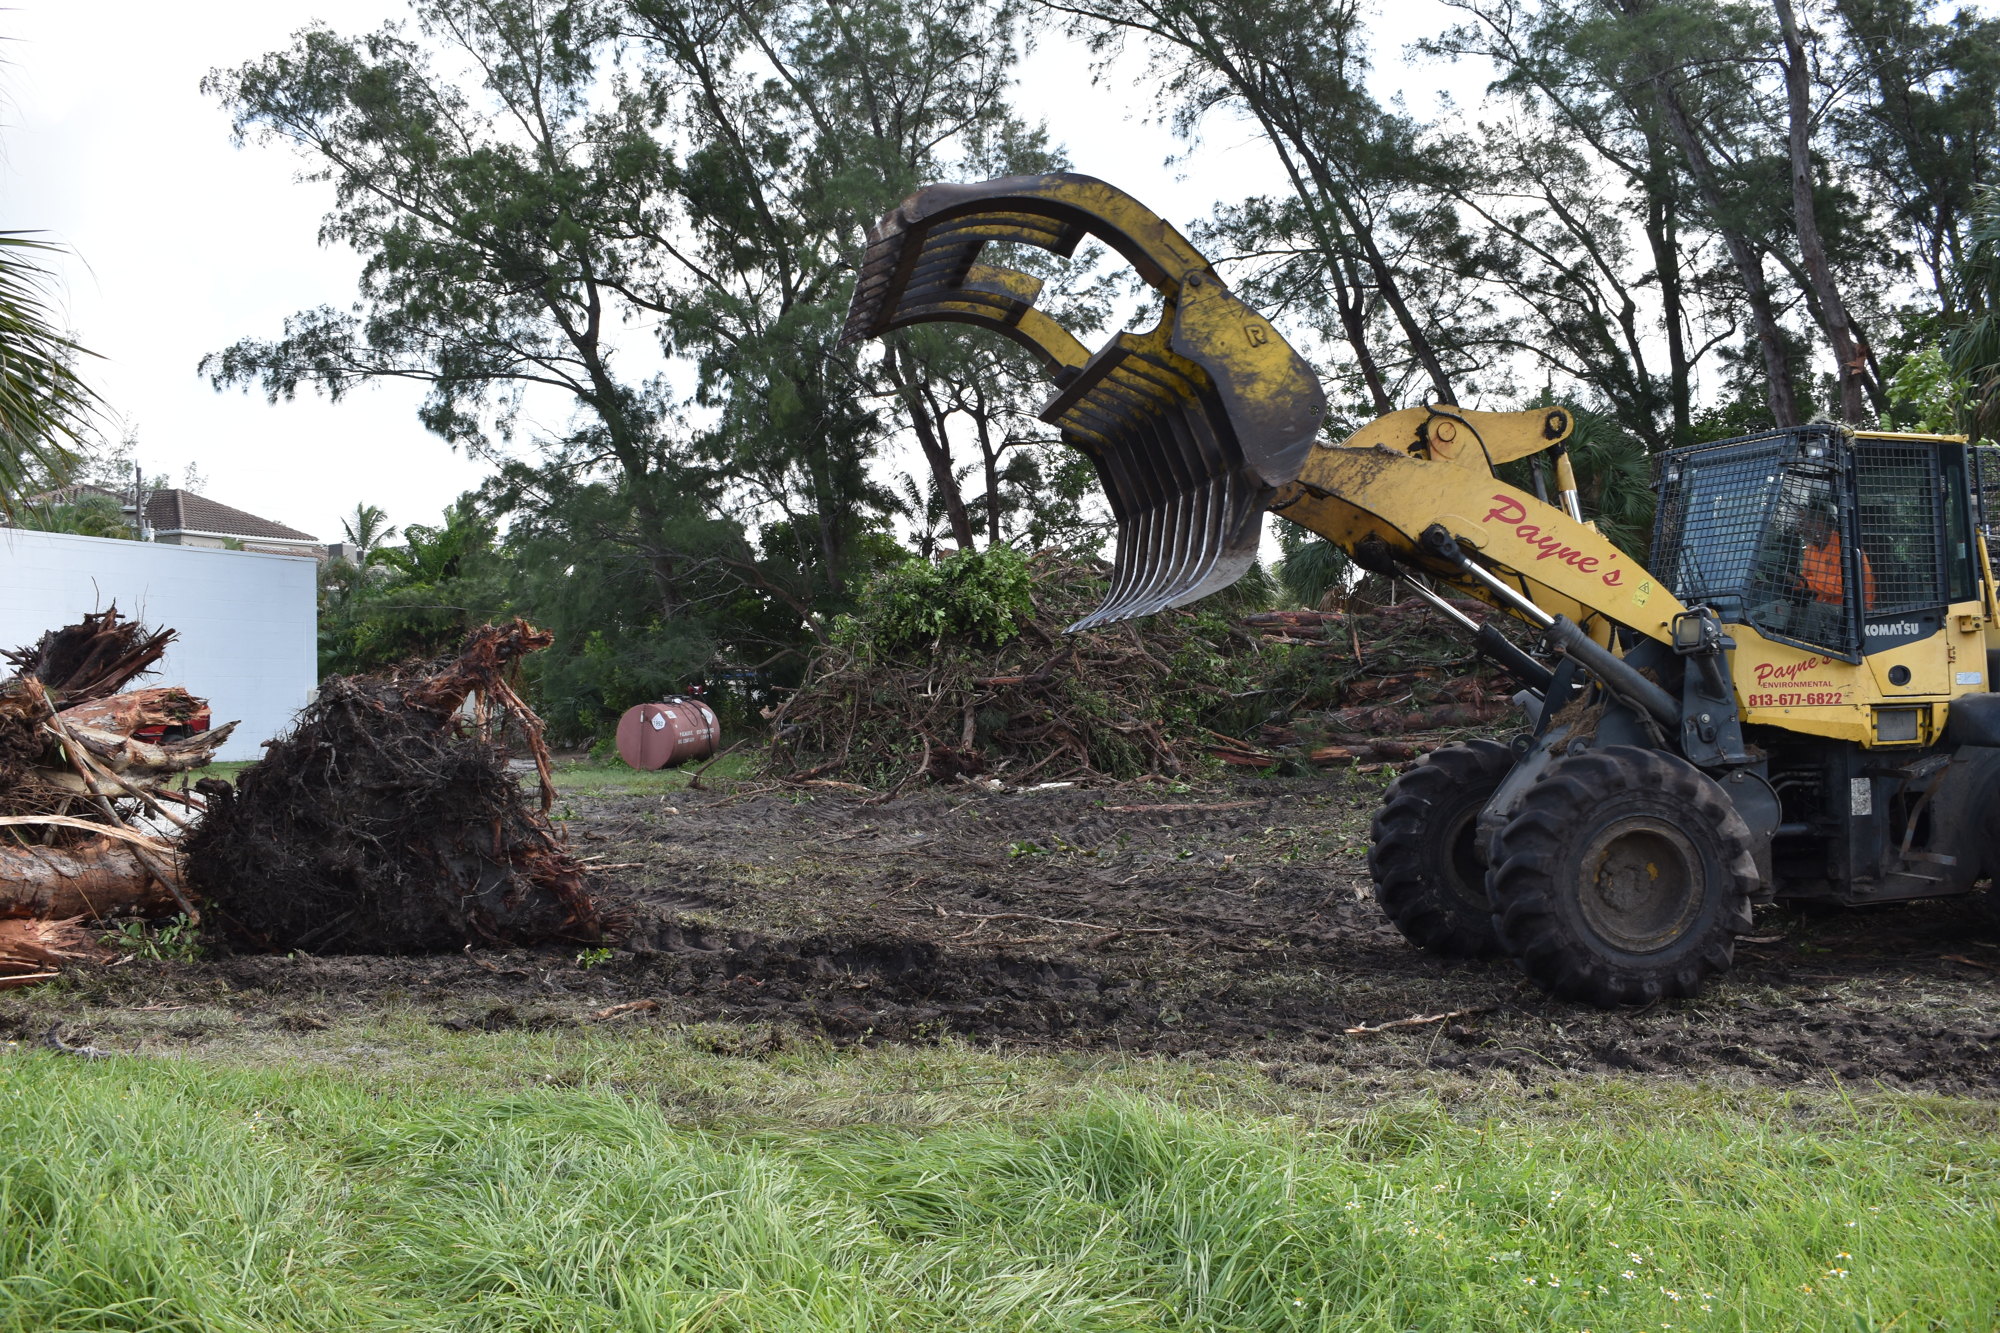 Brista Homes has hired Payne’s Environmental Services for tree removal along Gulf of Mexico Drive and the 597 Buttonwood Drive. The contractor has worked on clearing invasive trees in the last week.